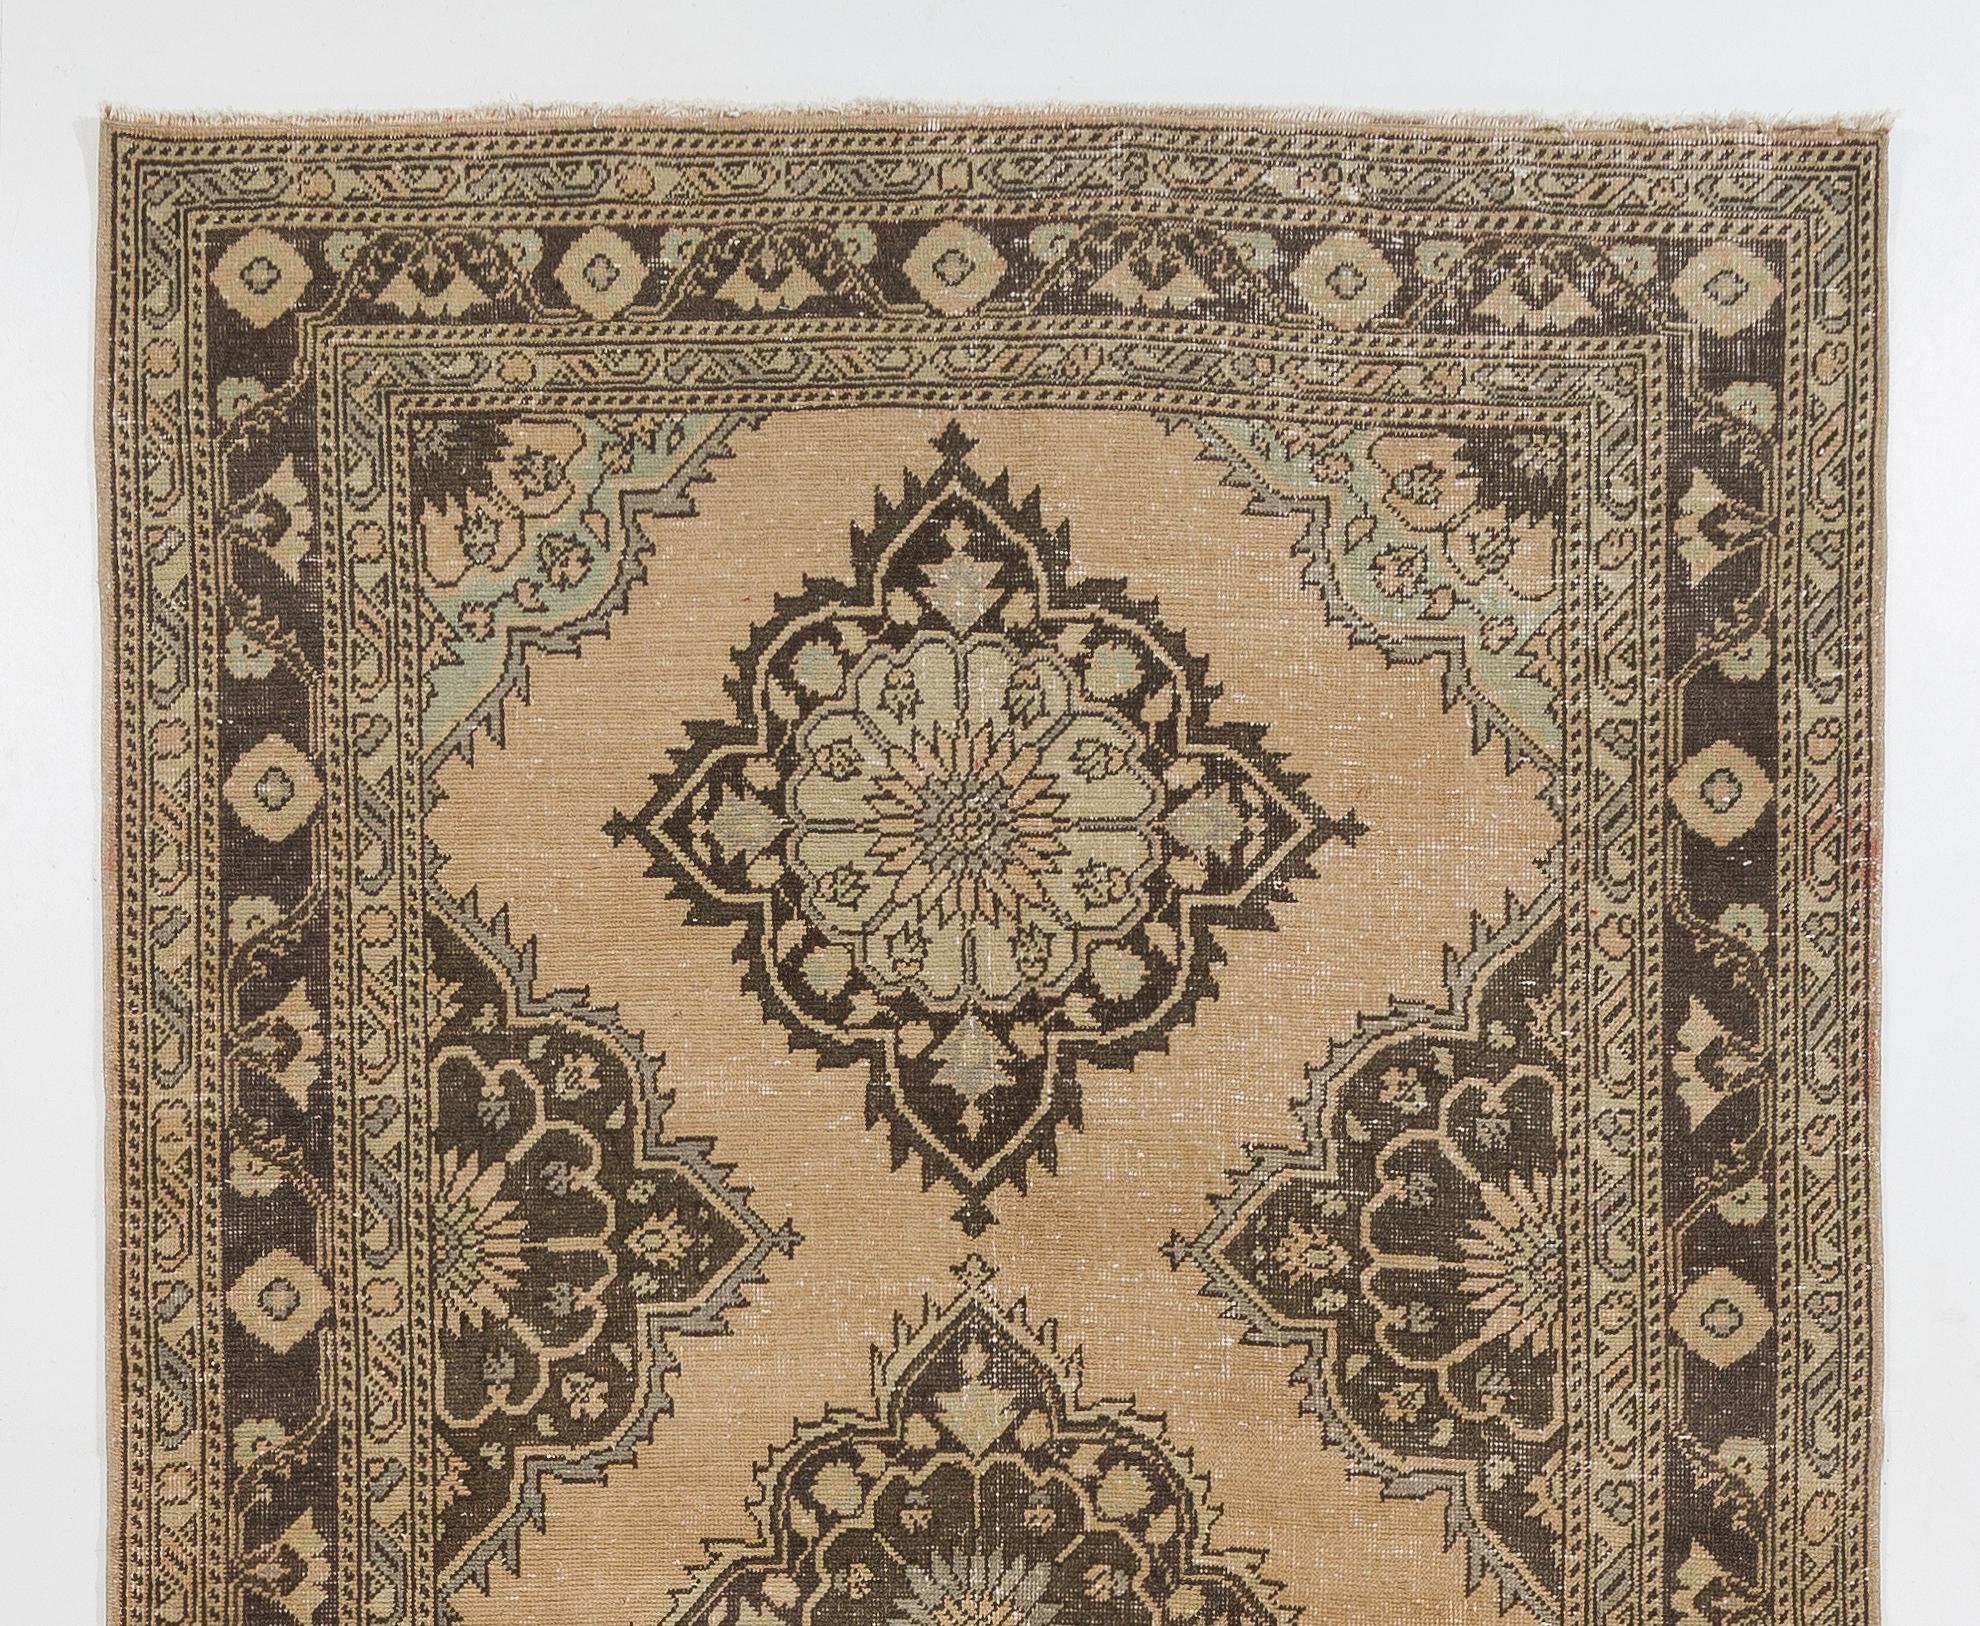 A vintage Turkish runner rug. It was hand knotted in the 1950s and multiple medallion design. Sturdy and can be used on a high traffic area, suitable for both residential and commercial interiors. Measures: 5x12.8 Ft.